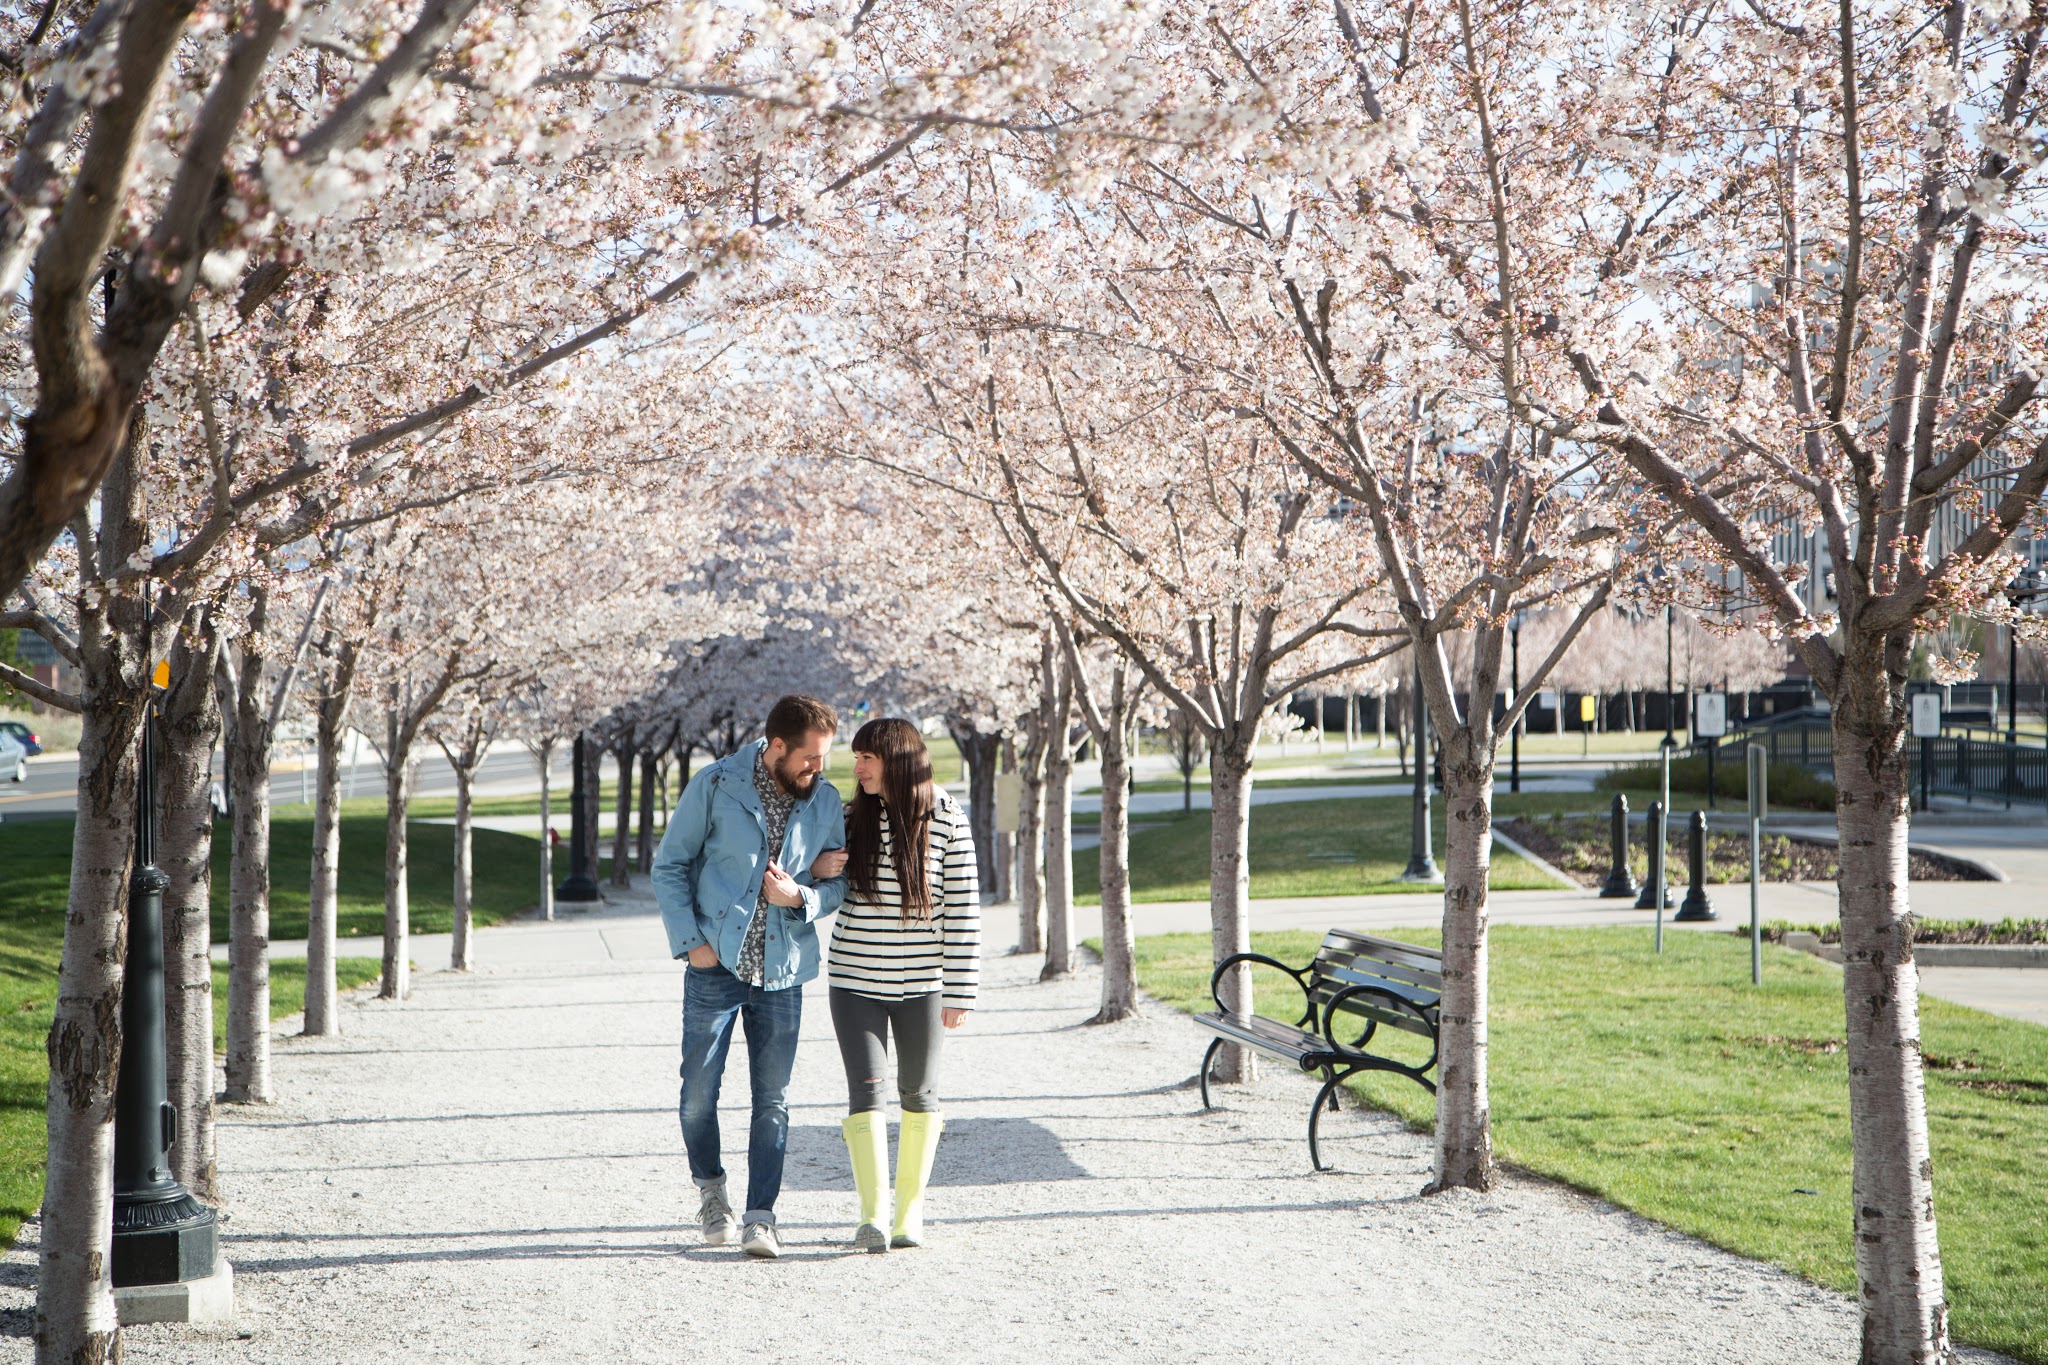 Couples Spring Style at the Utah State Capitol Blossoms